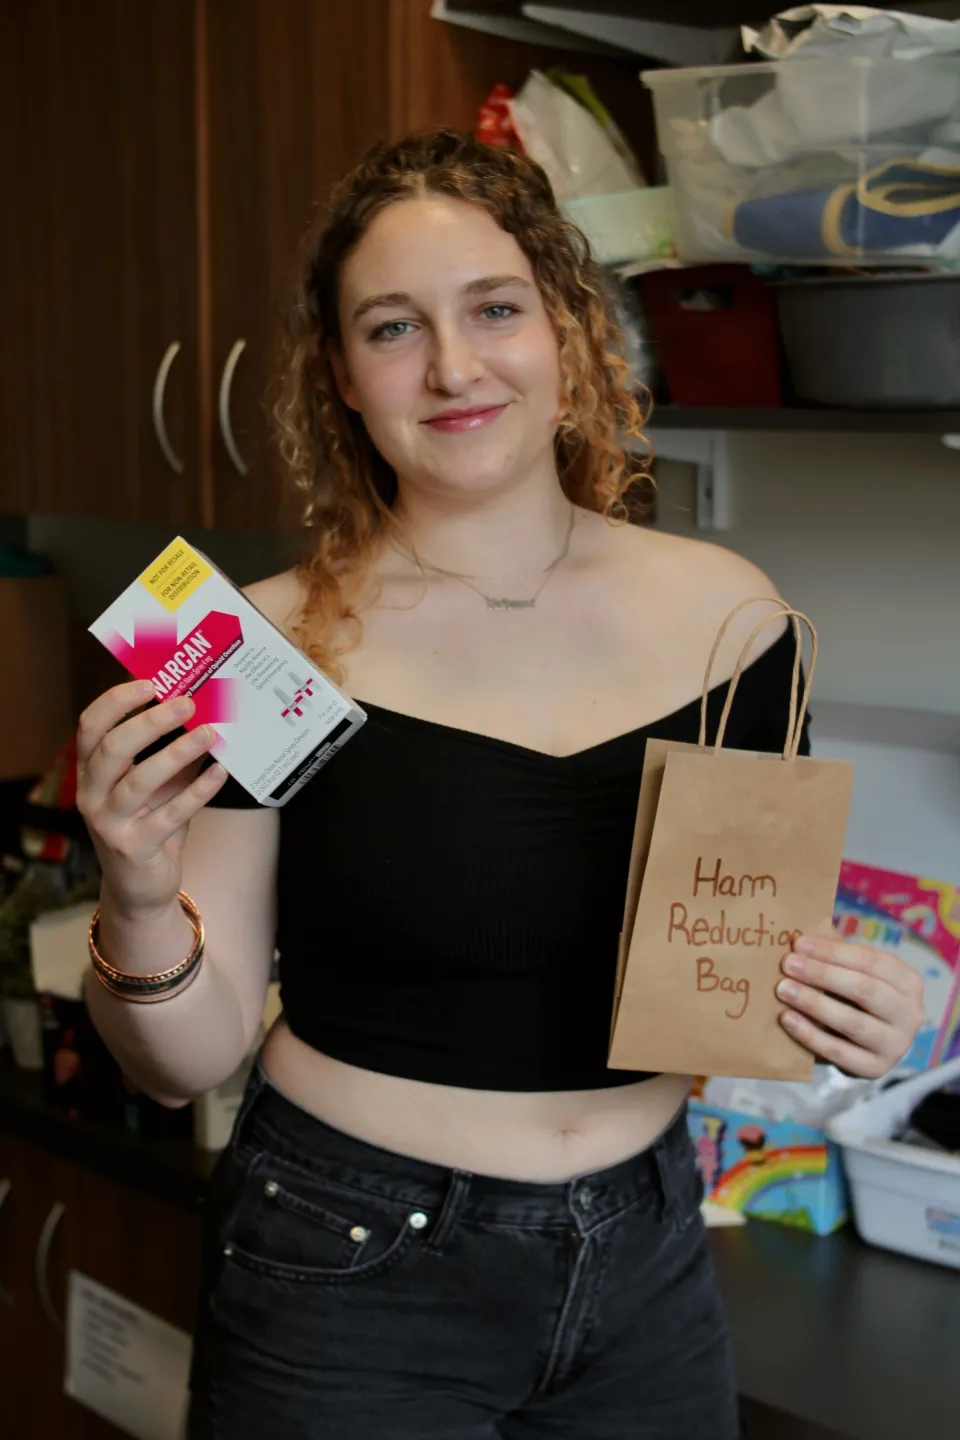 Cailin Young ‘24 prepares a harm reduction bag in the Schacht Center, holding up Narcan and smiling